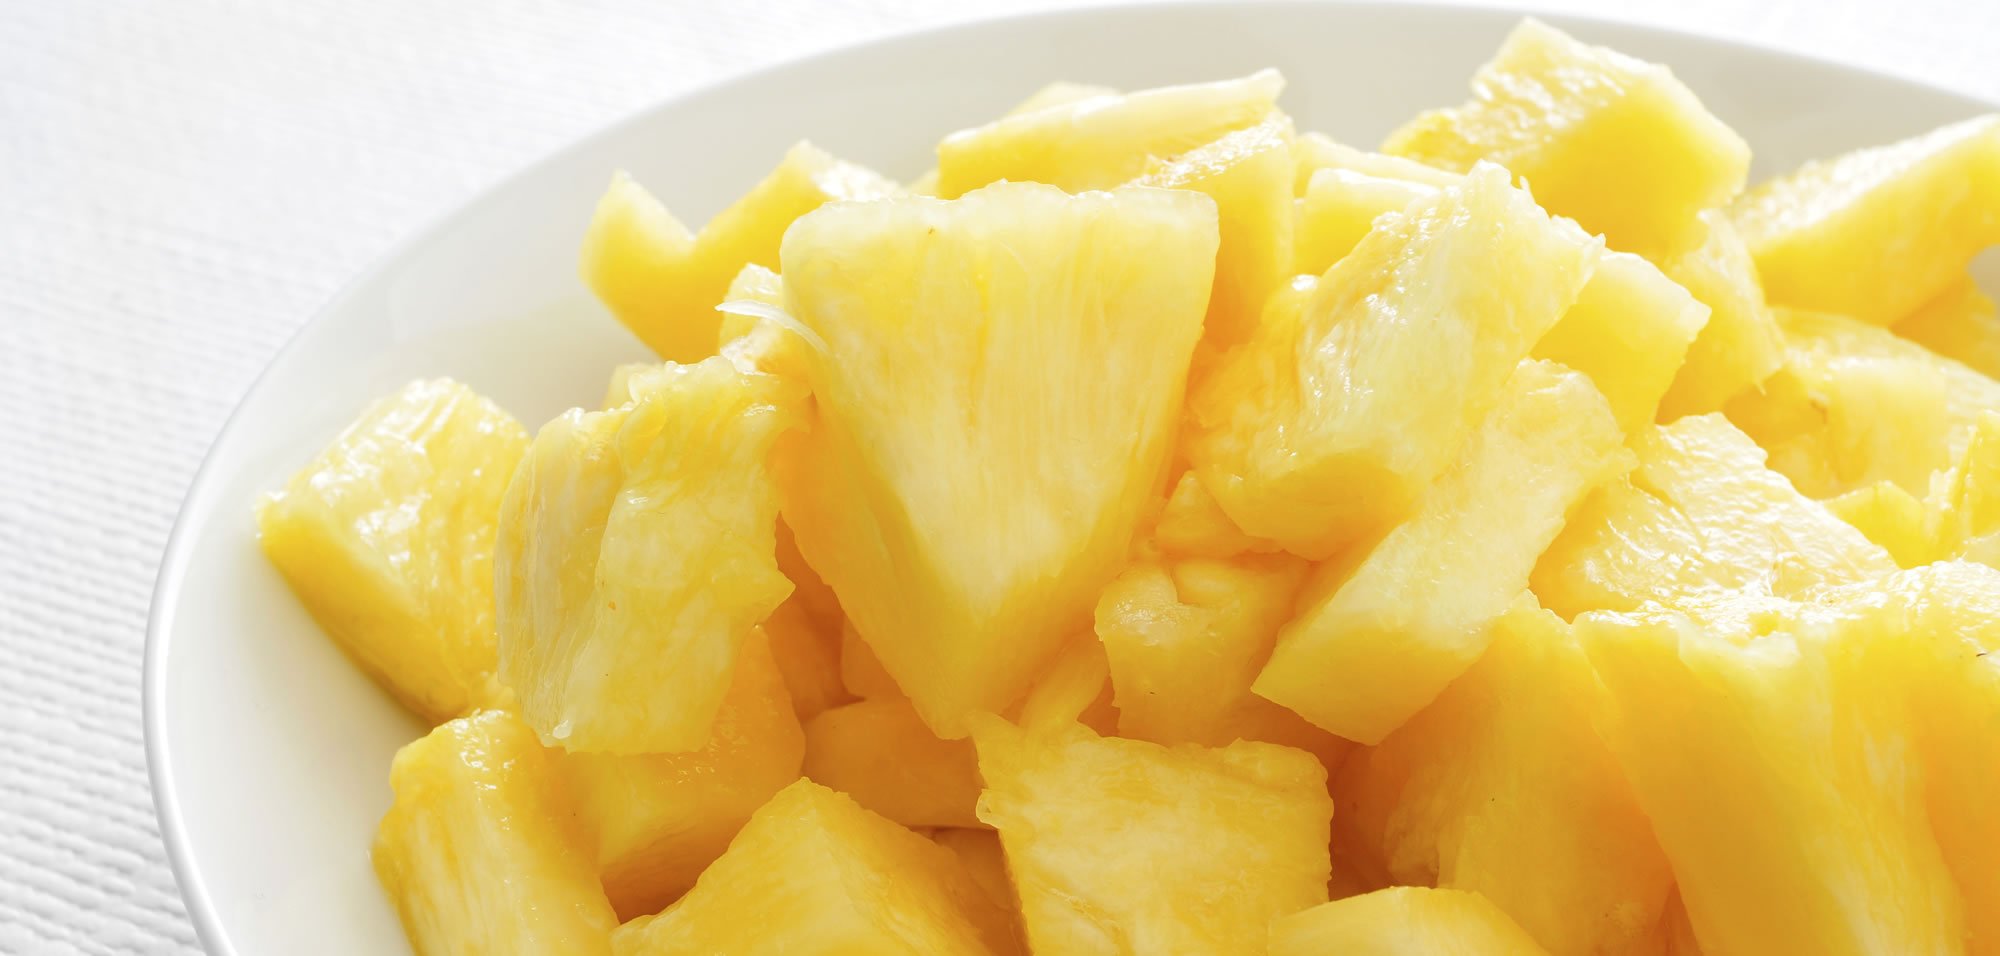 Healthy Pineapple Recipes for Weight Loss